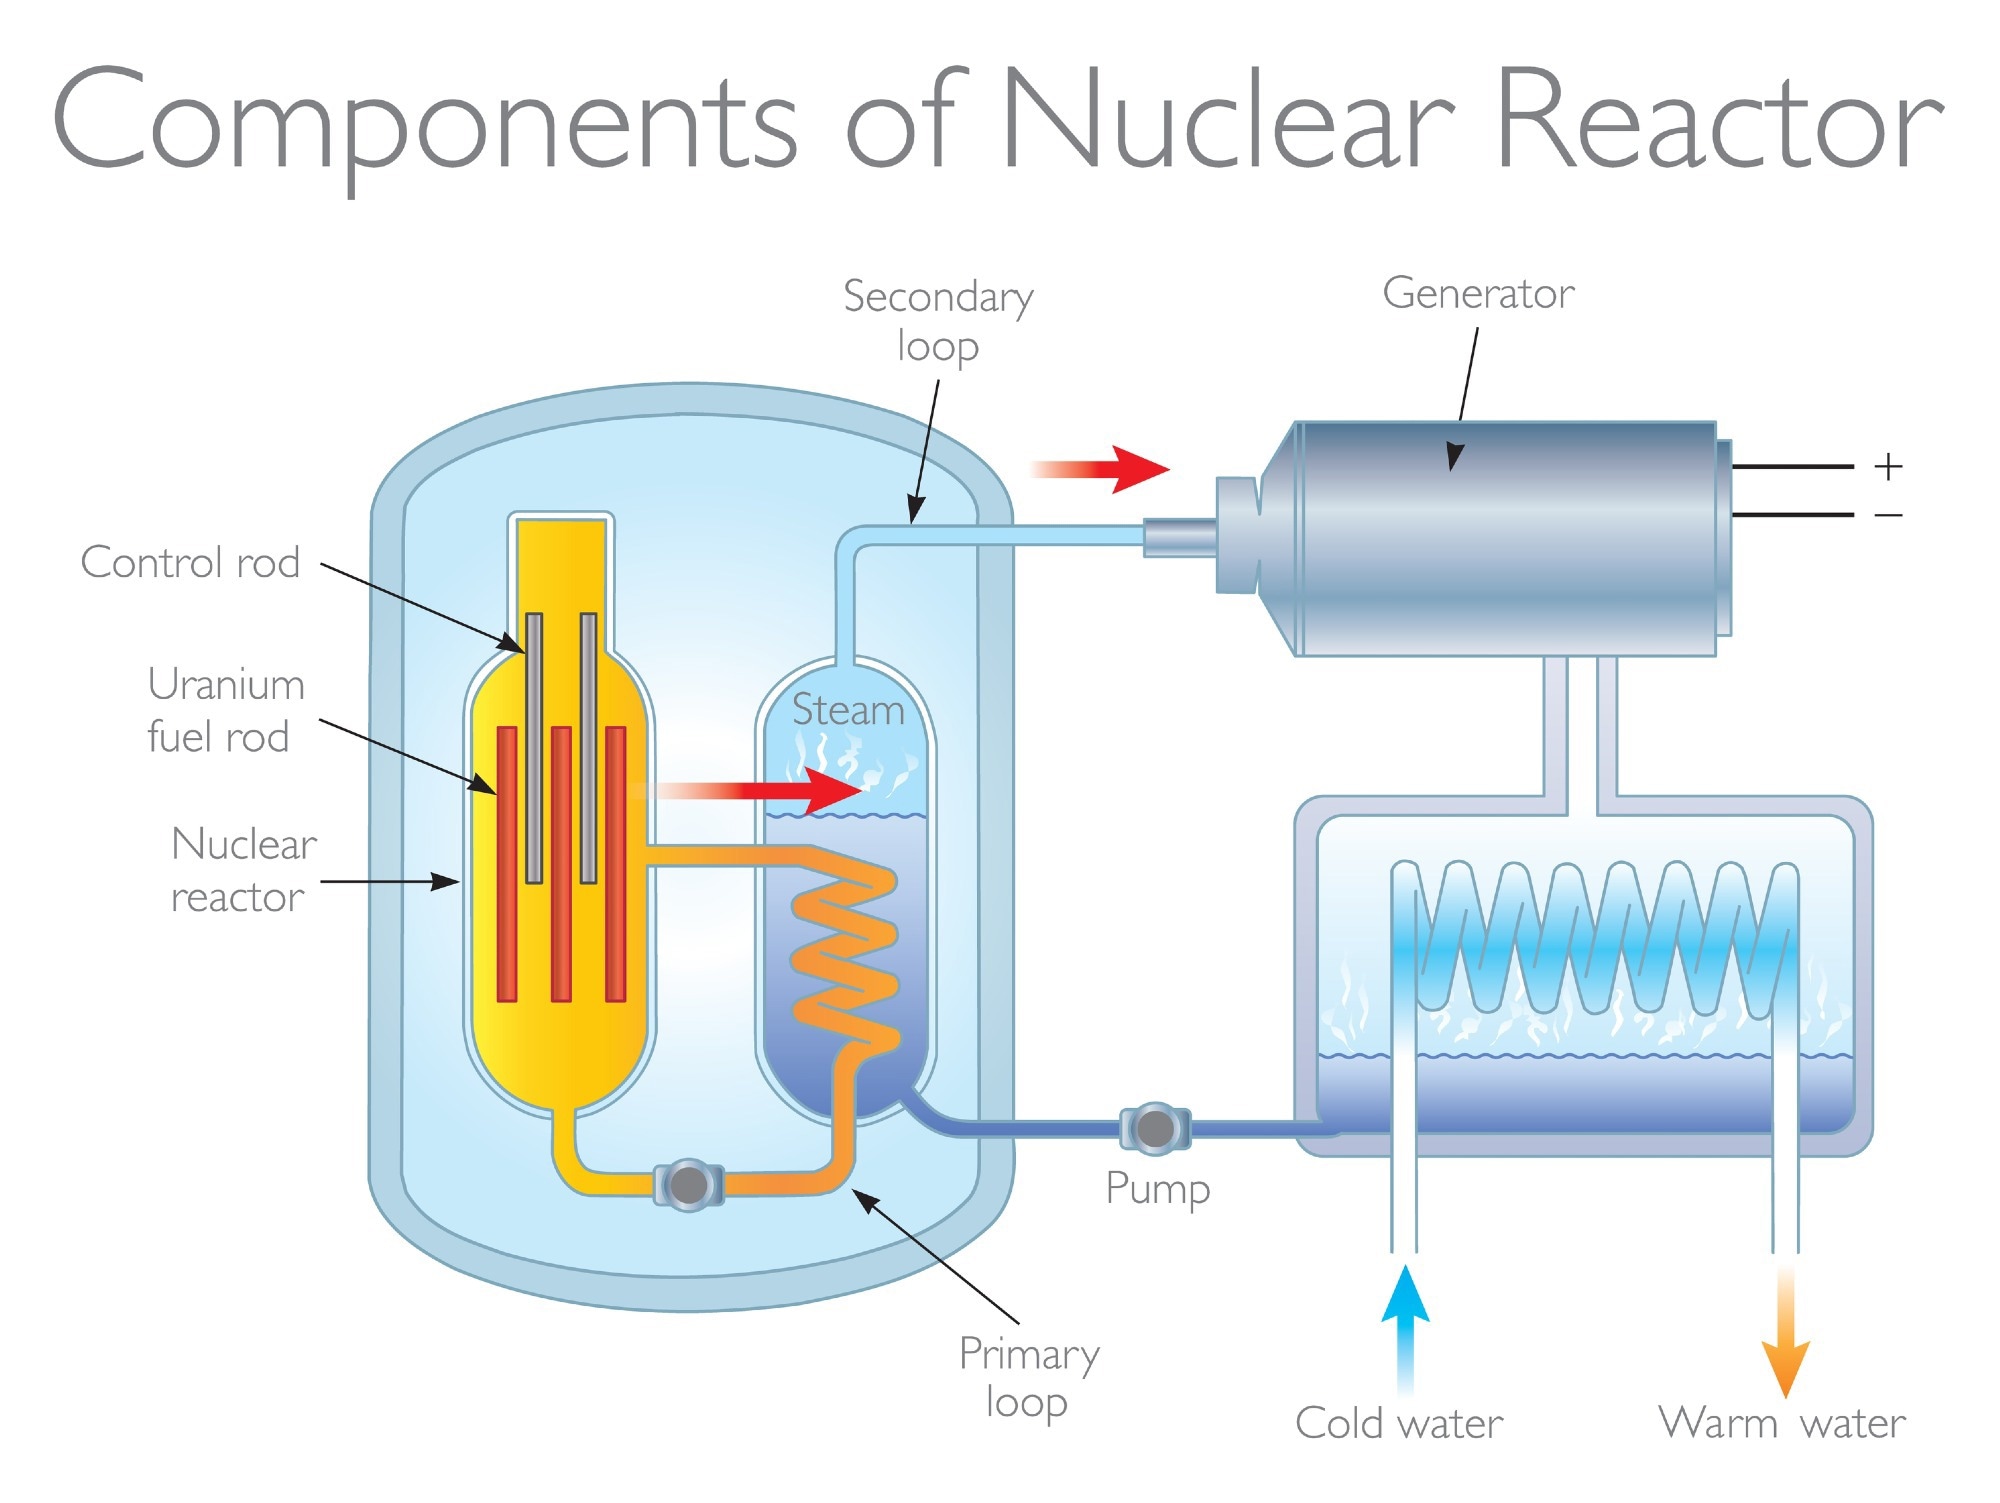 Components of a Nuclear Reactor